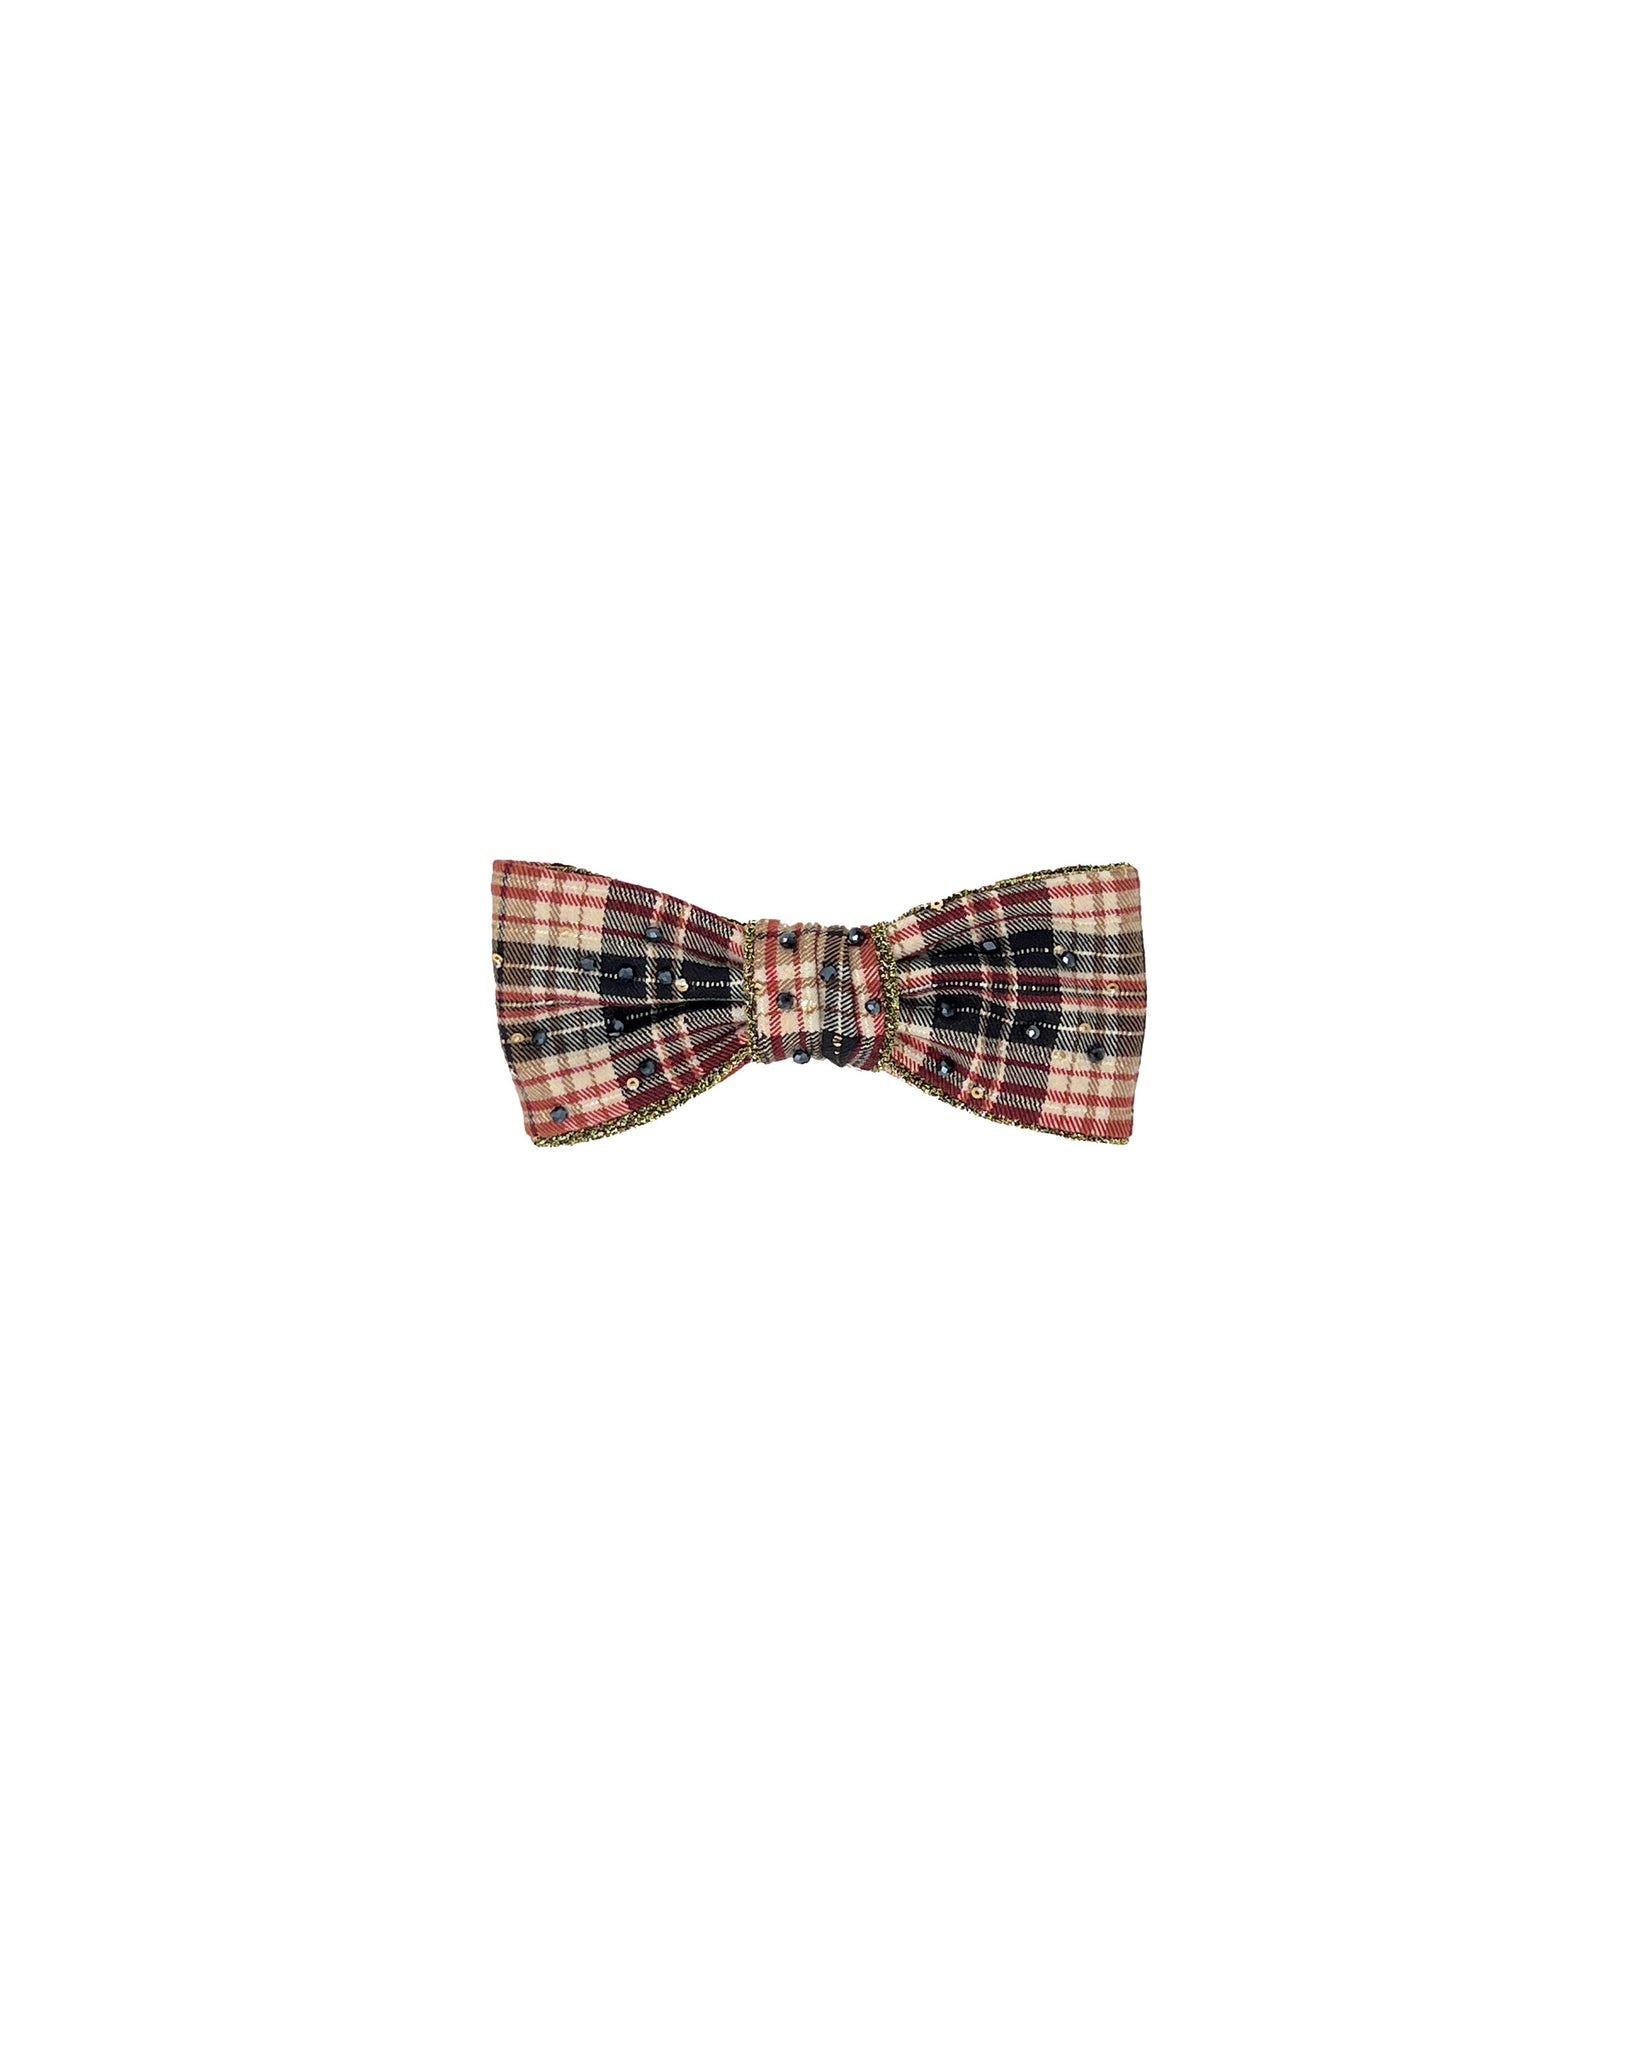 Embroidered beige and red tartan bow barrette